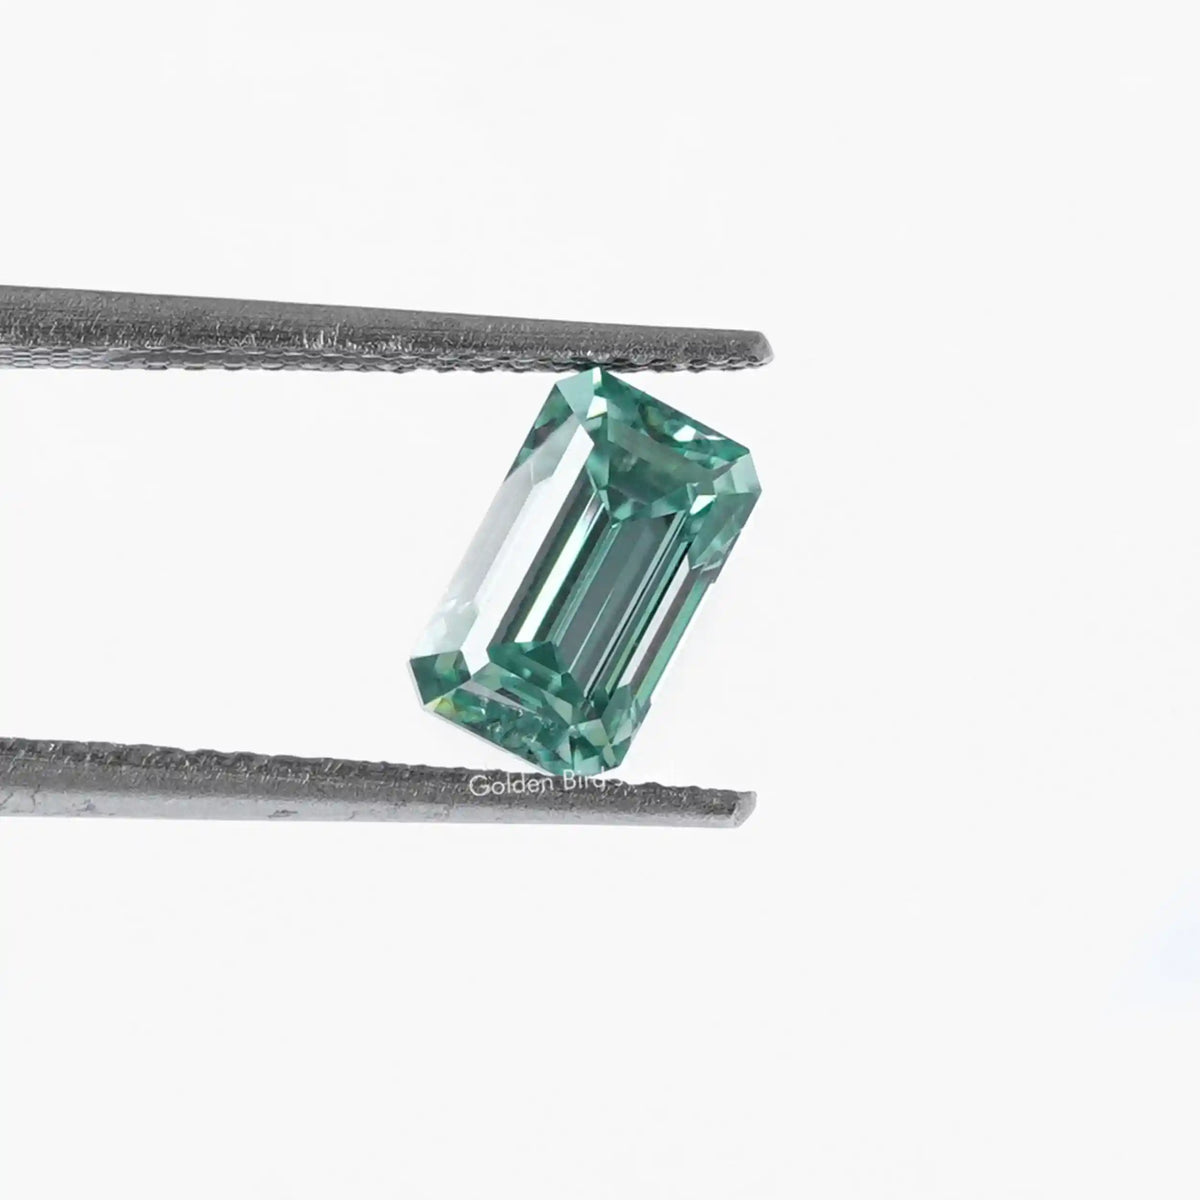 [In twizzer front view of blue emerald cut loose moissanite]-[Golden Bird Jewels]